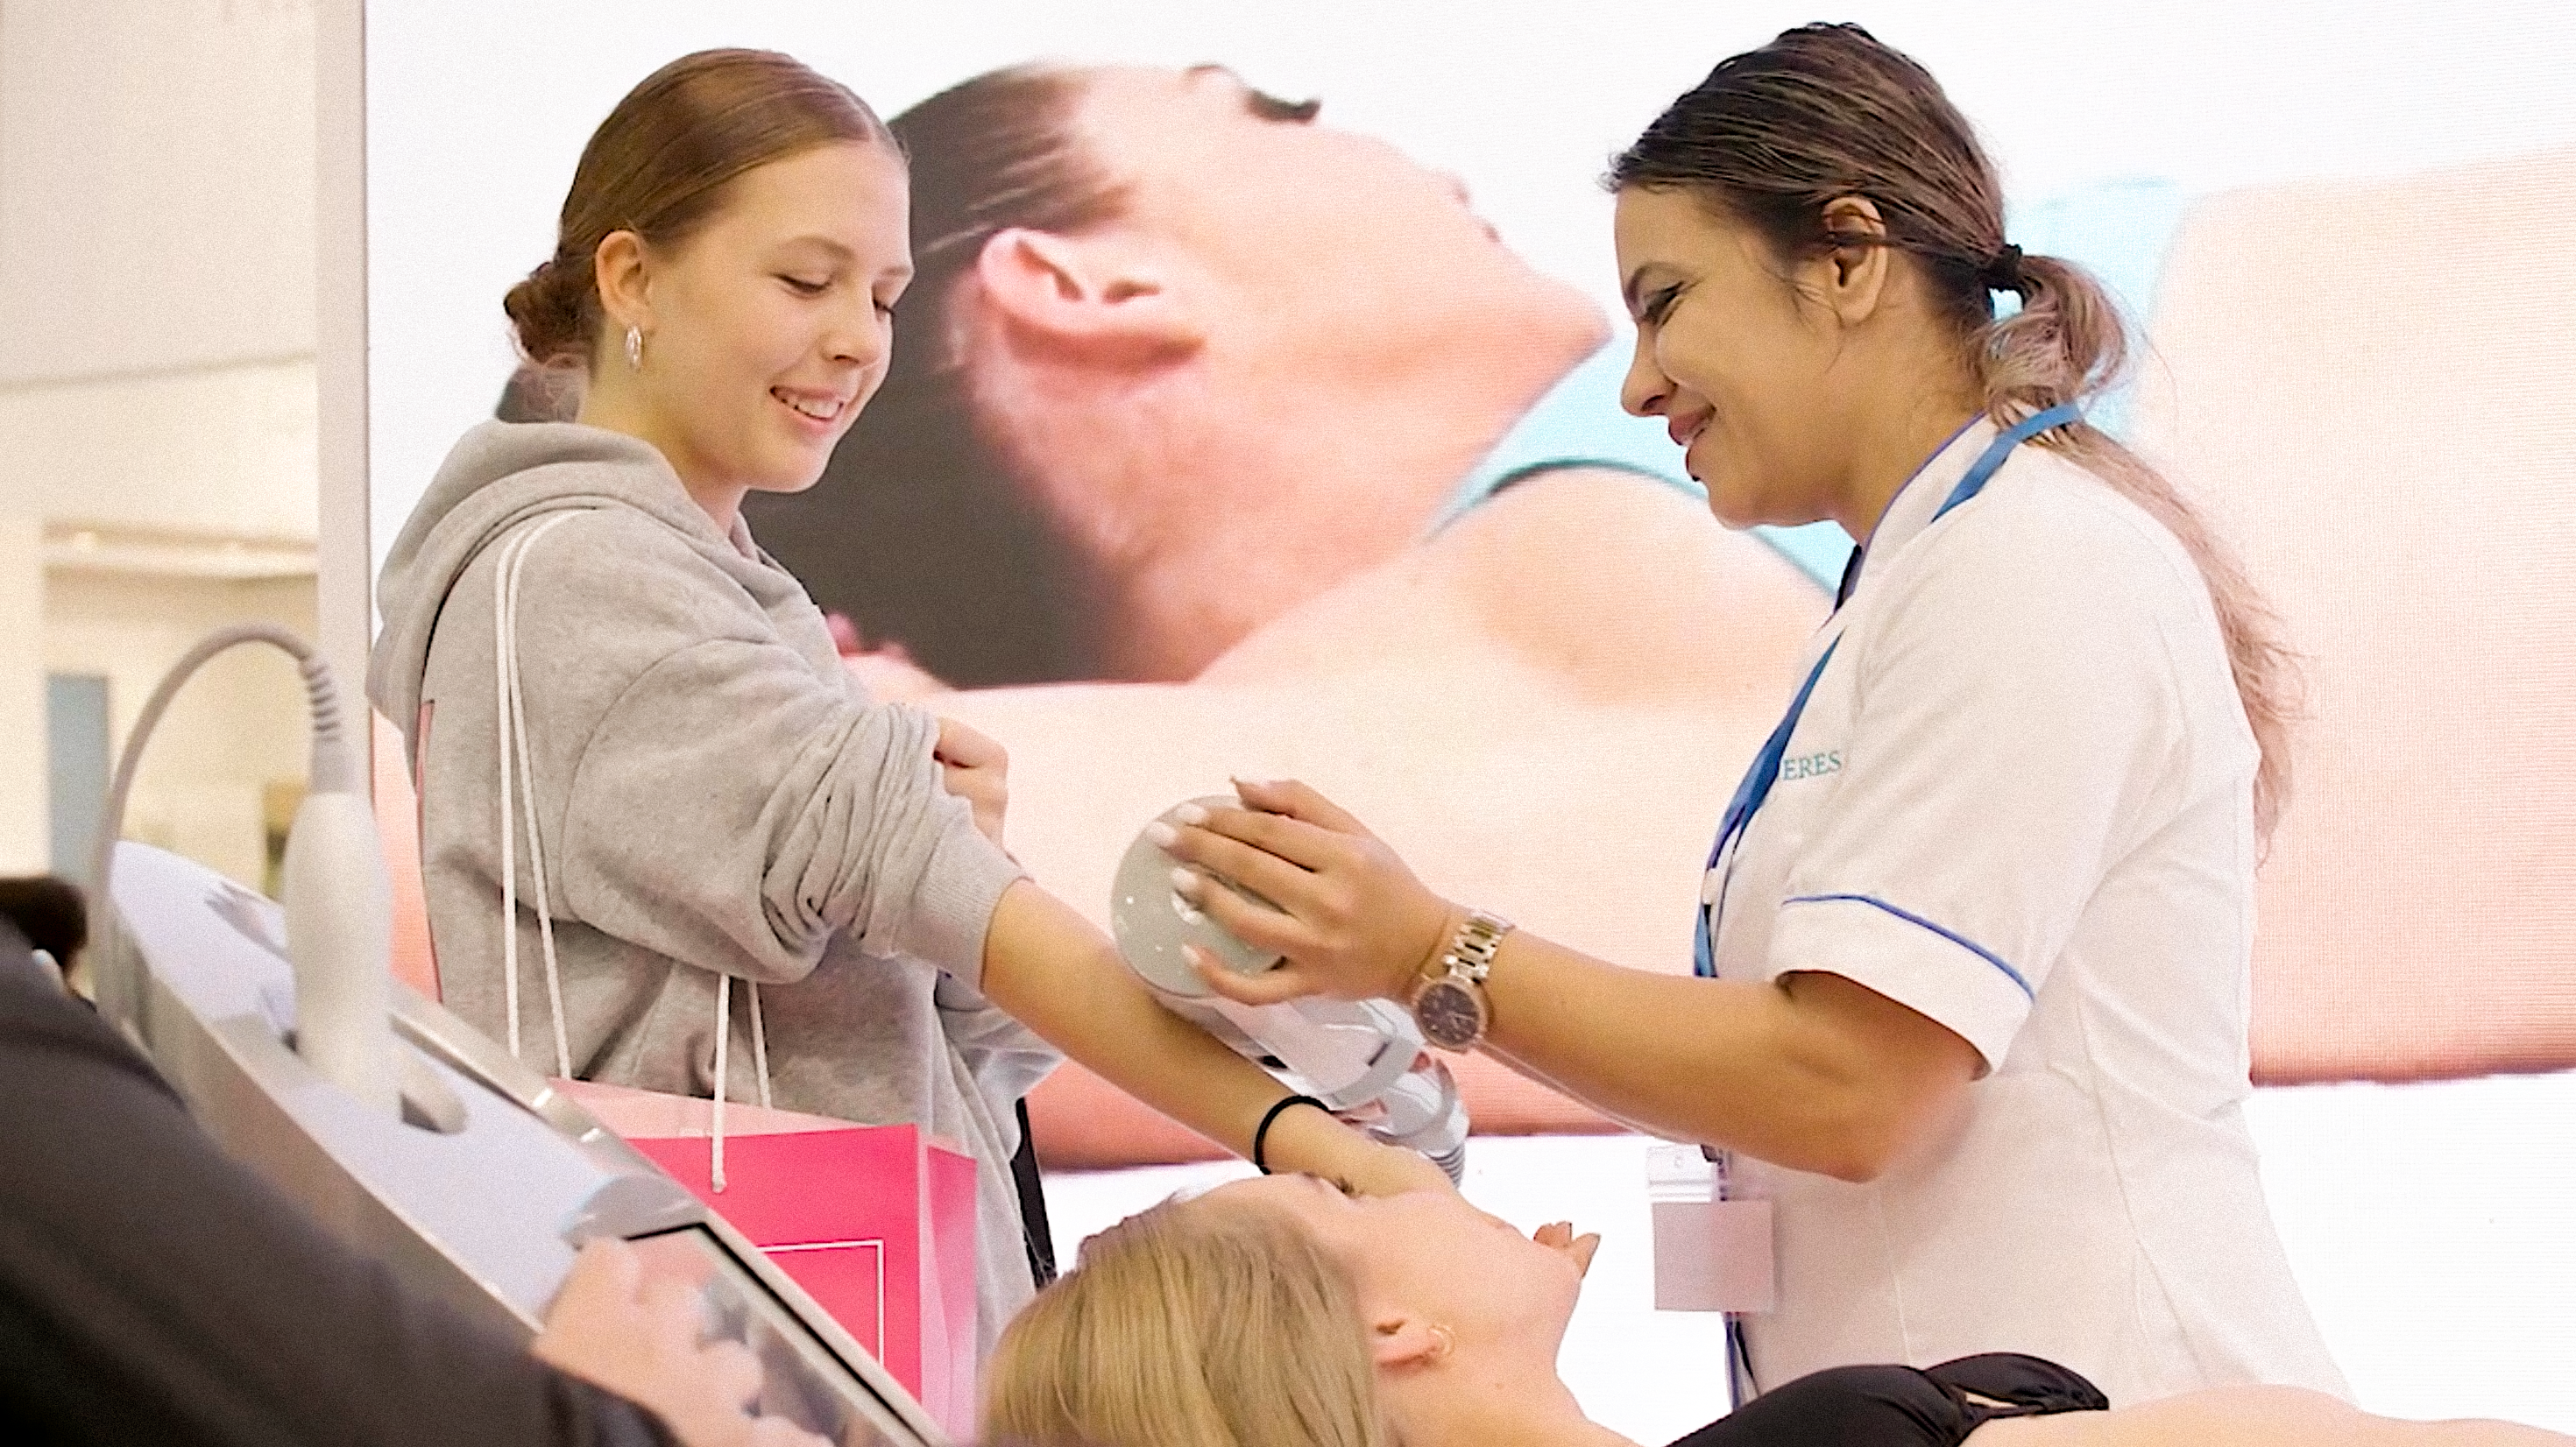 Beauty trends at the BEAUTY trade fair in Düsseldorf: permanent make-up, pedicures and cellulite control